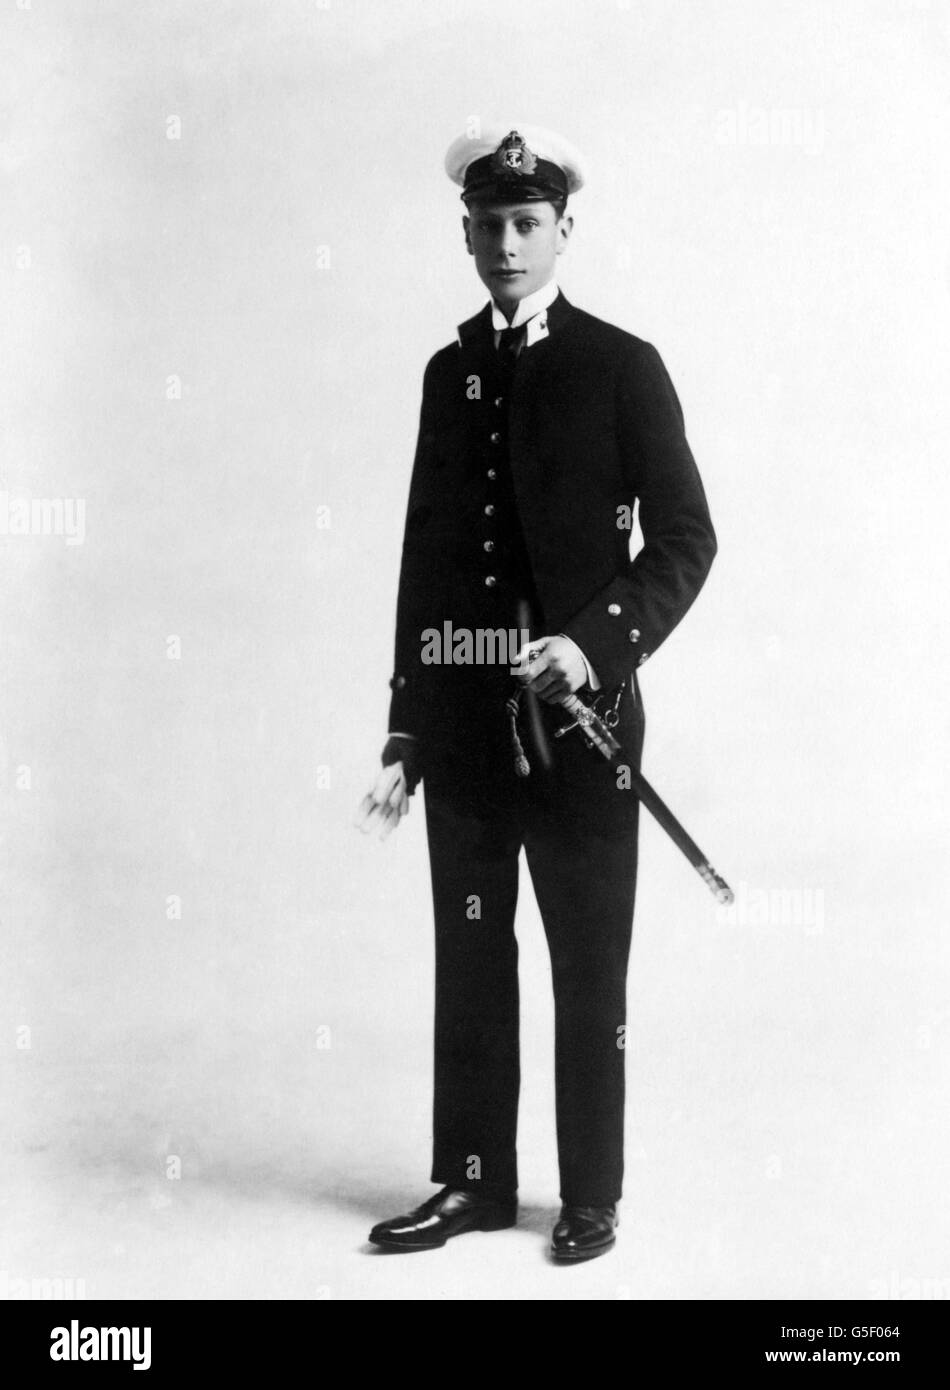 Prince Albert, Duke of York, who later became King George VI, dressed as a Midshipman in 1914. Stock Photo